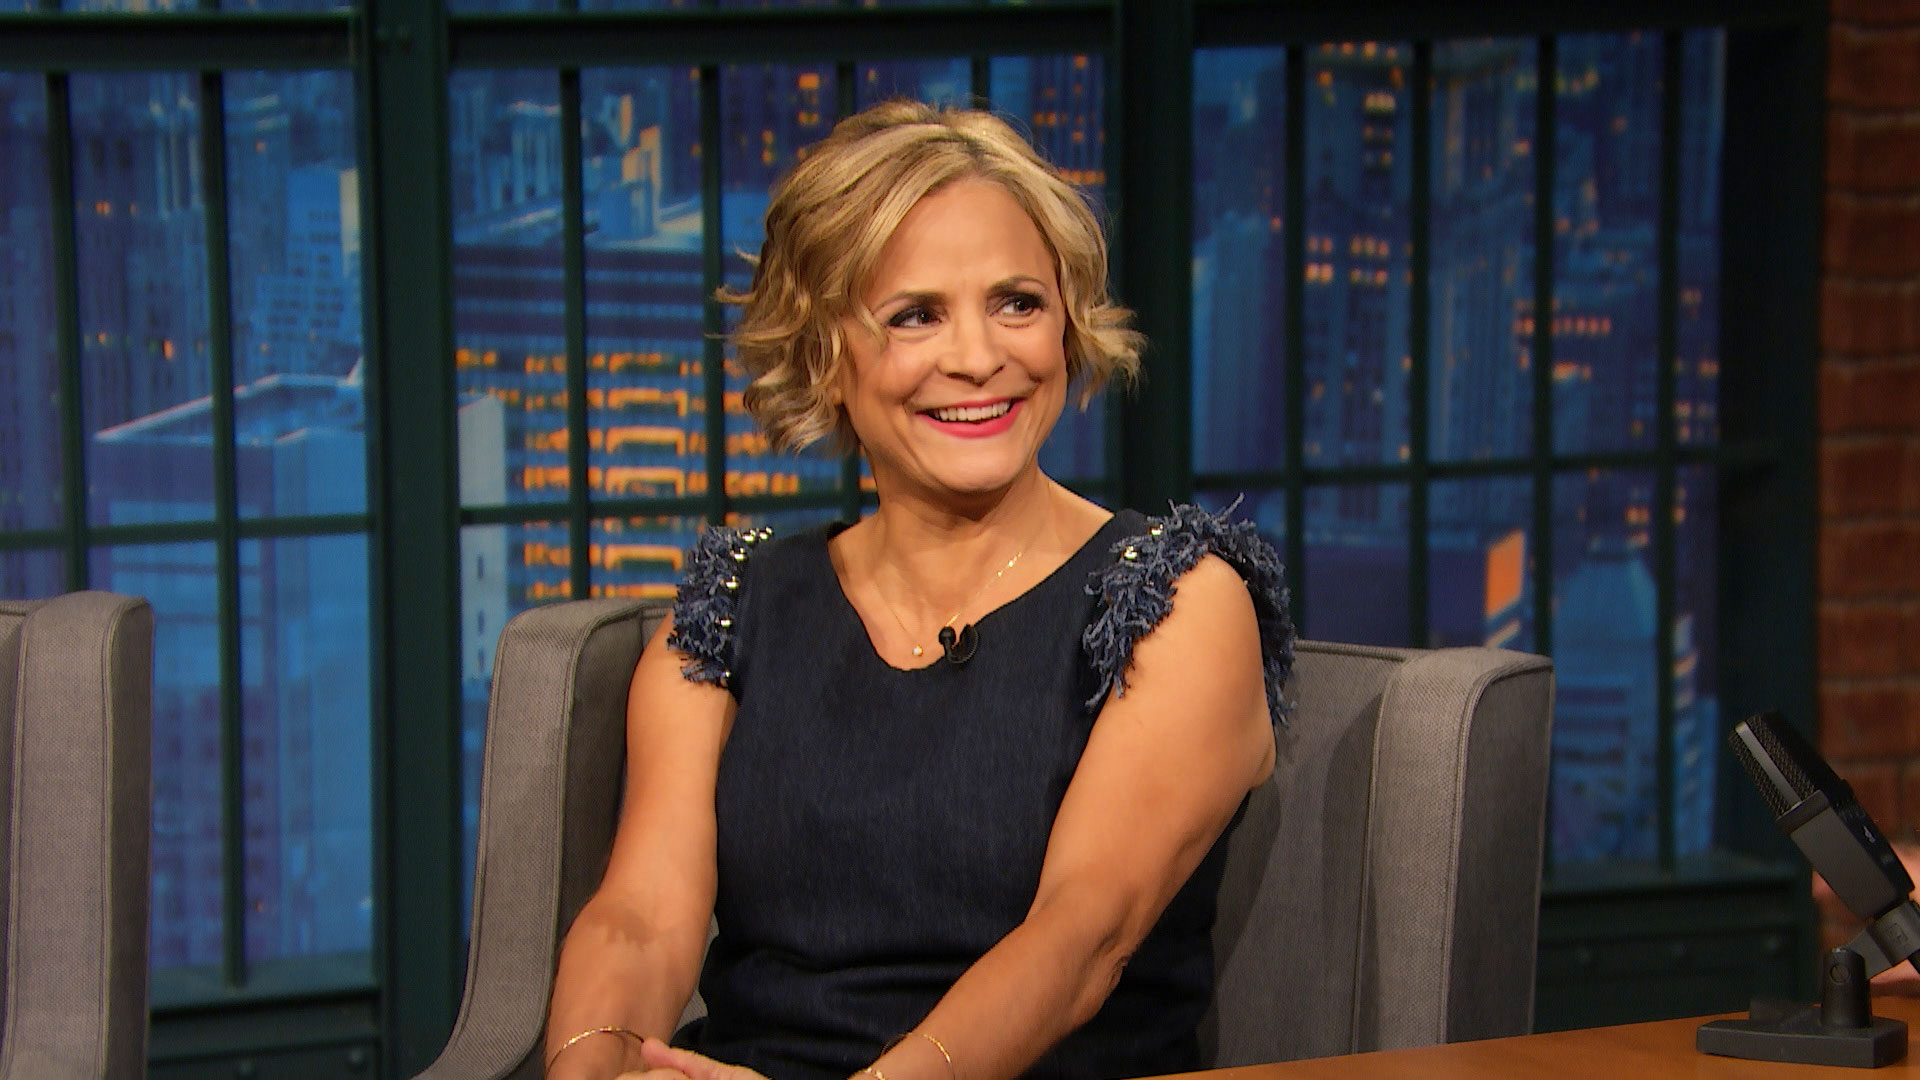 Amy Sedaris Reviews the Characters She Plays on At Home with Amy Sedaris.